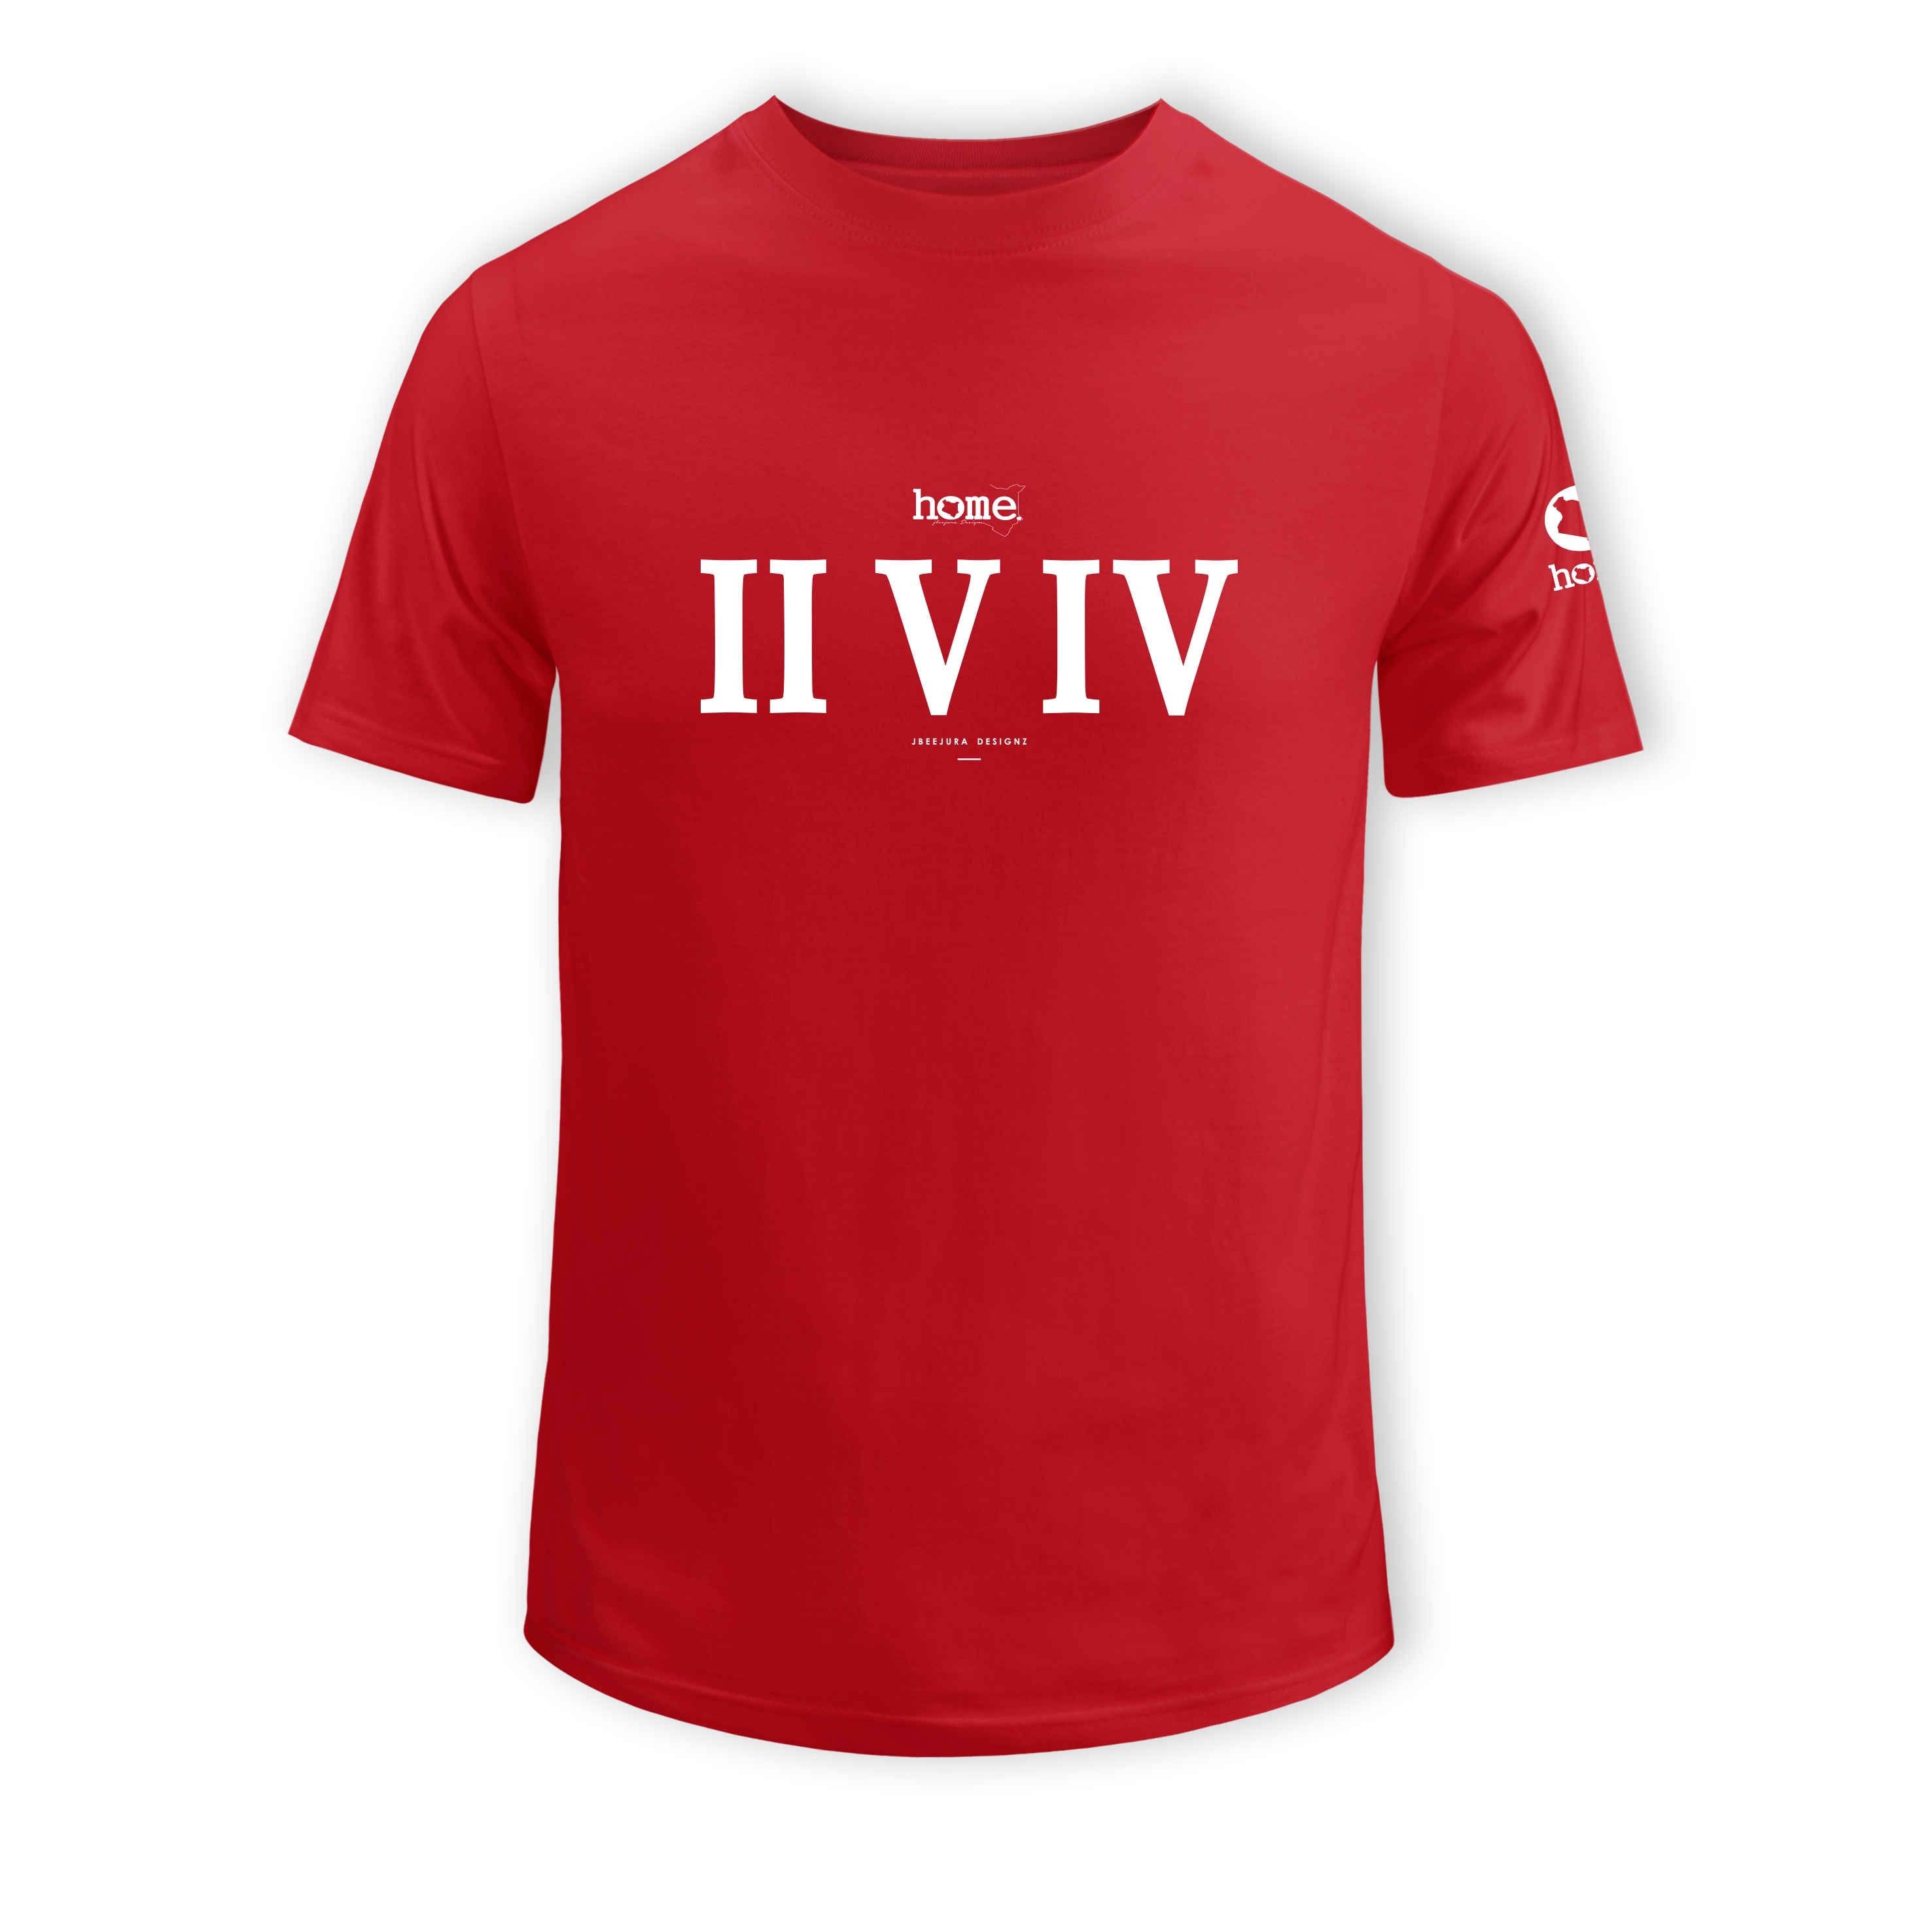 home_254 SHORT-SLEEVED RED T-SHIRT WITH A WHITE ROMAN NUMERALS PRINT – COTTON PLUS FABRIC